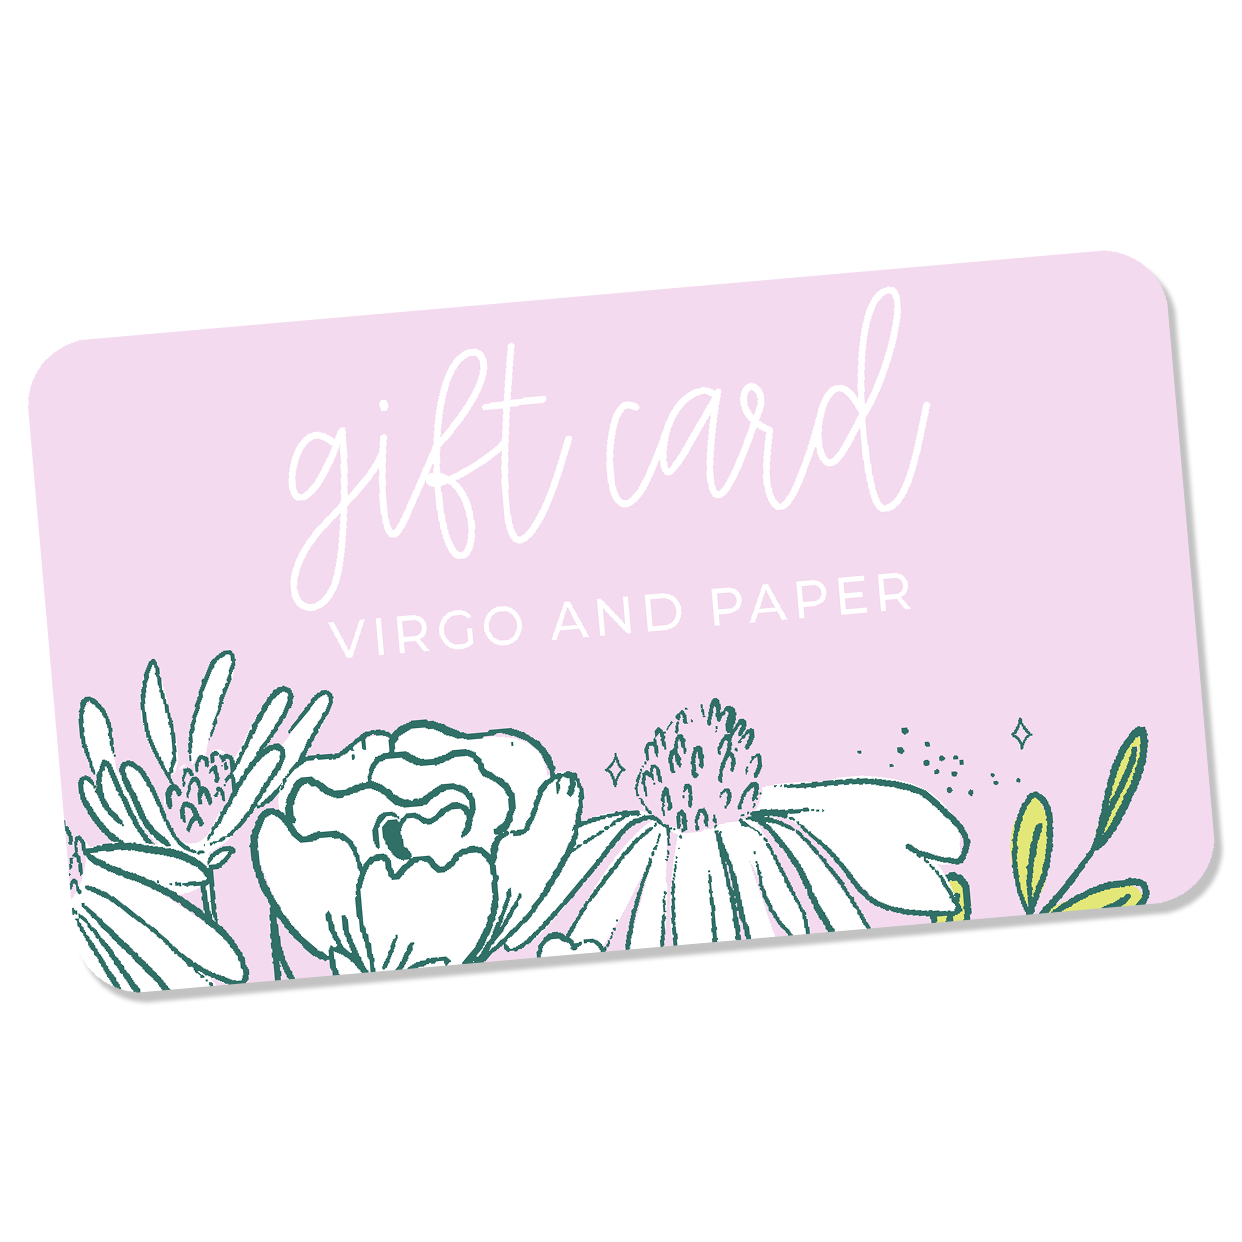 Virgo and Paper Gift Card - Choose the Amount